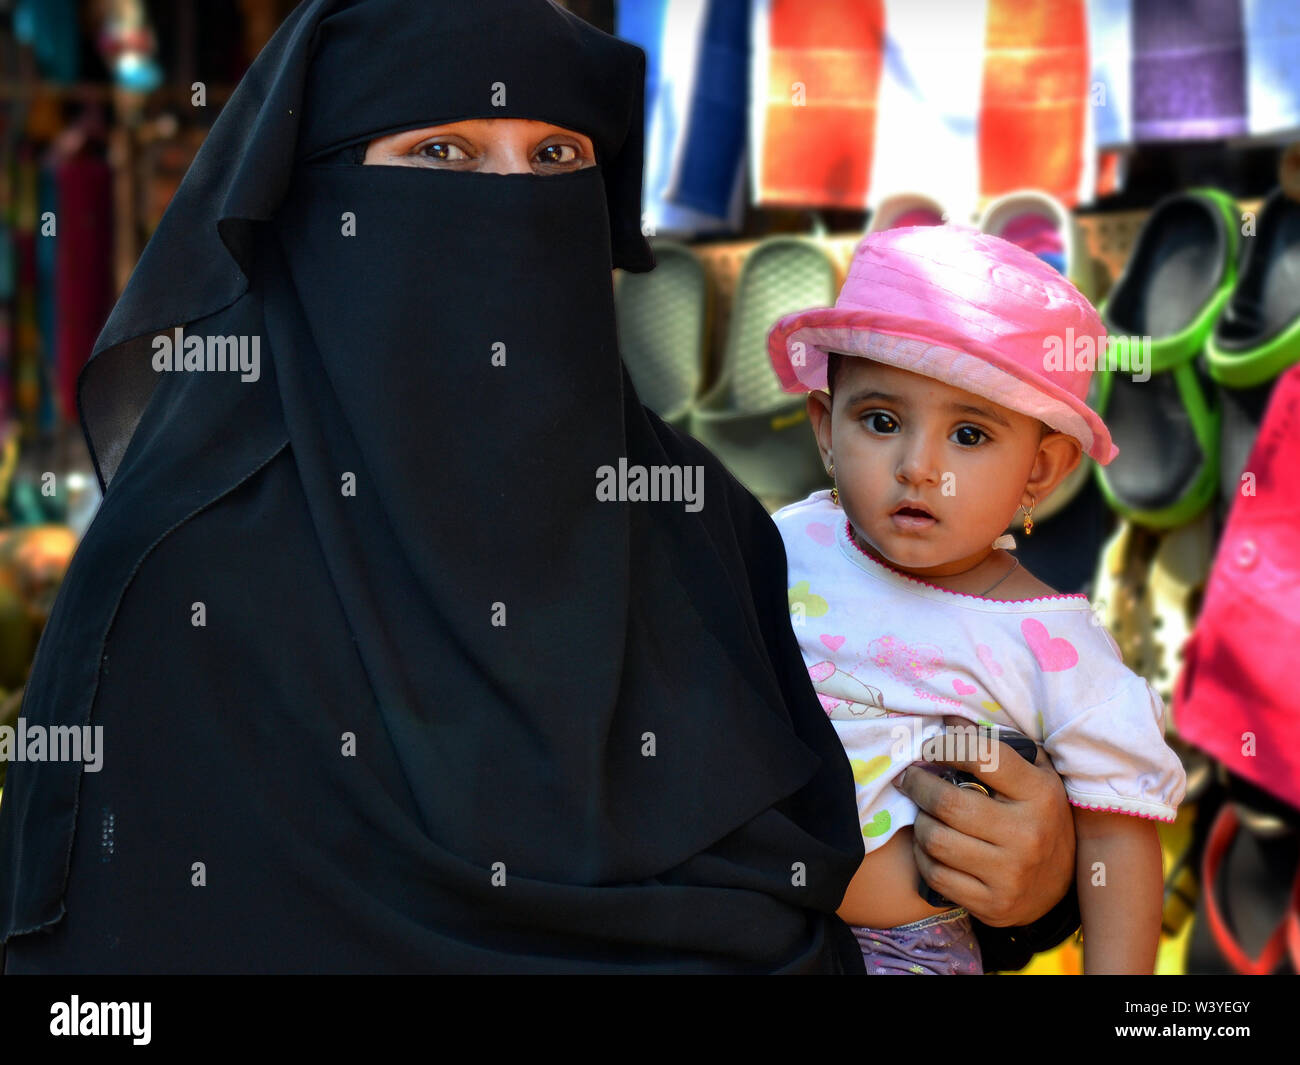 Indian Muslim woman with talkative eyes wears a black niqab and burqa and carries her little daughter in her arm. Stock Photo